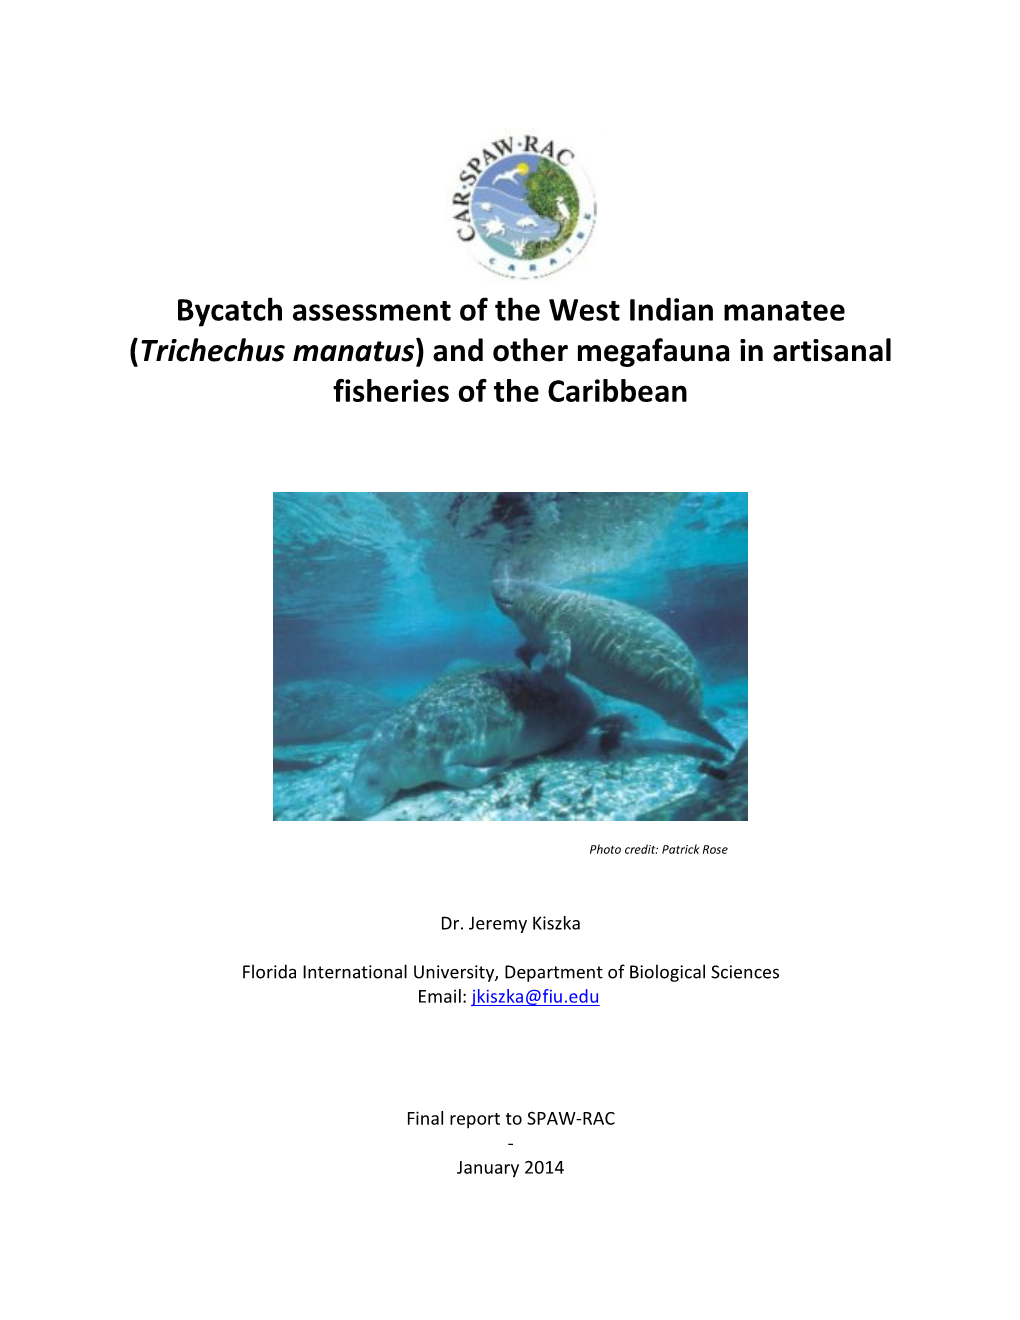 Bycatch Assessment of the West Indian Manatee (Trichechus Manatus) and Other Megafauna in Artisanal Fisheries of the Caribbean